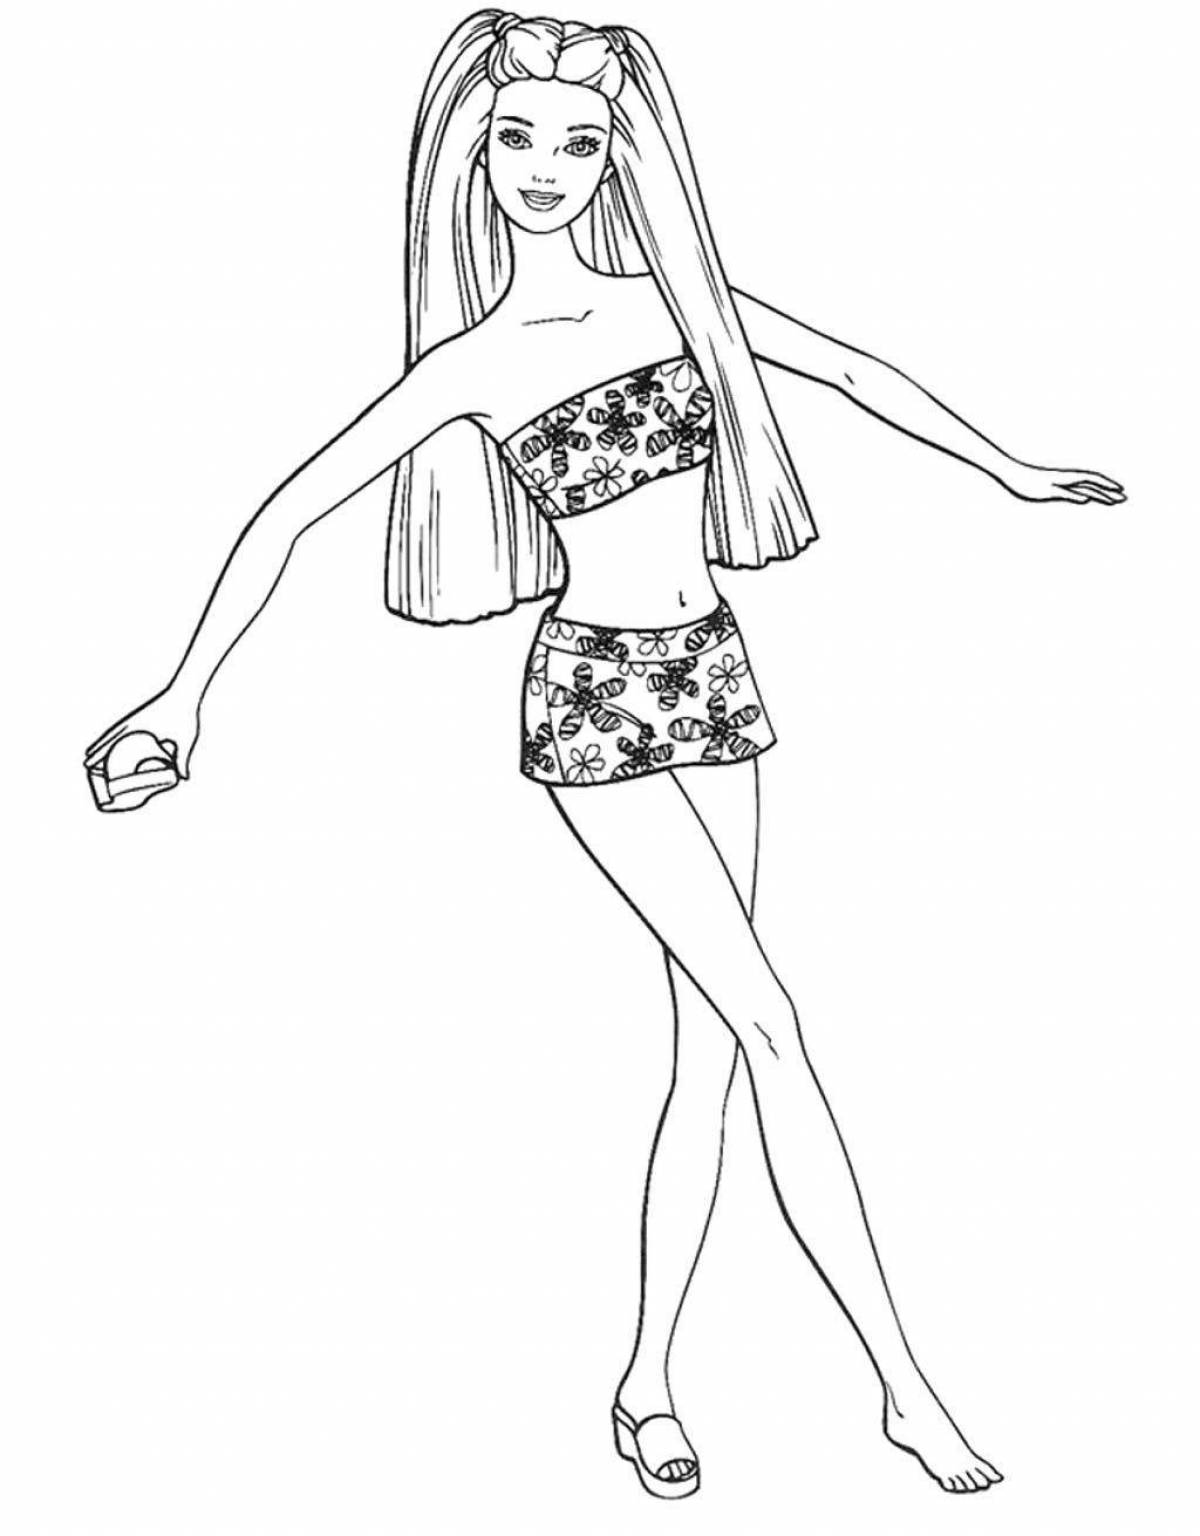 Coloring book wild barbie doll